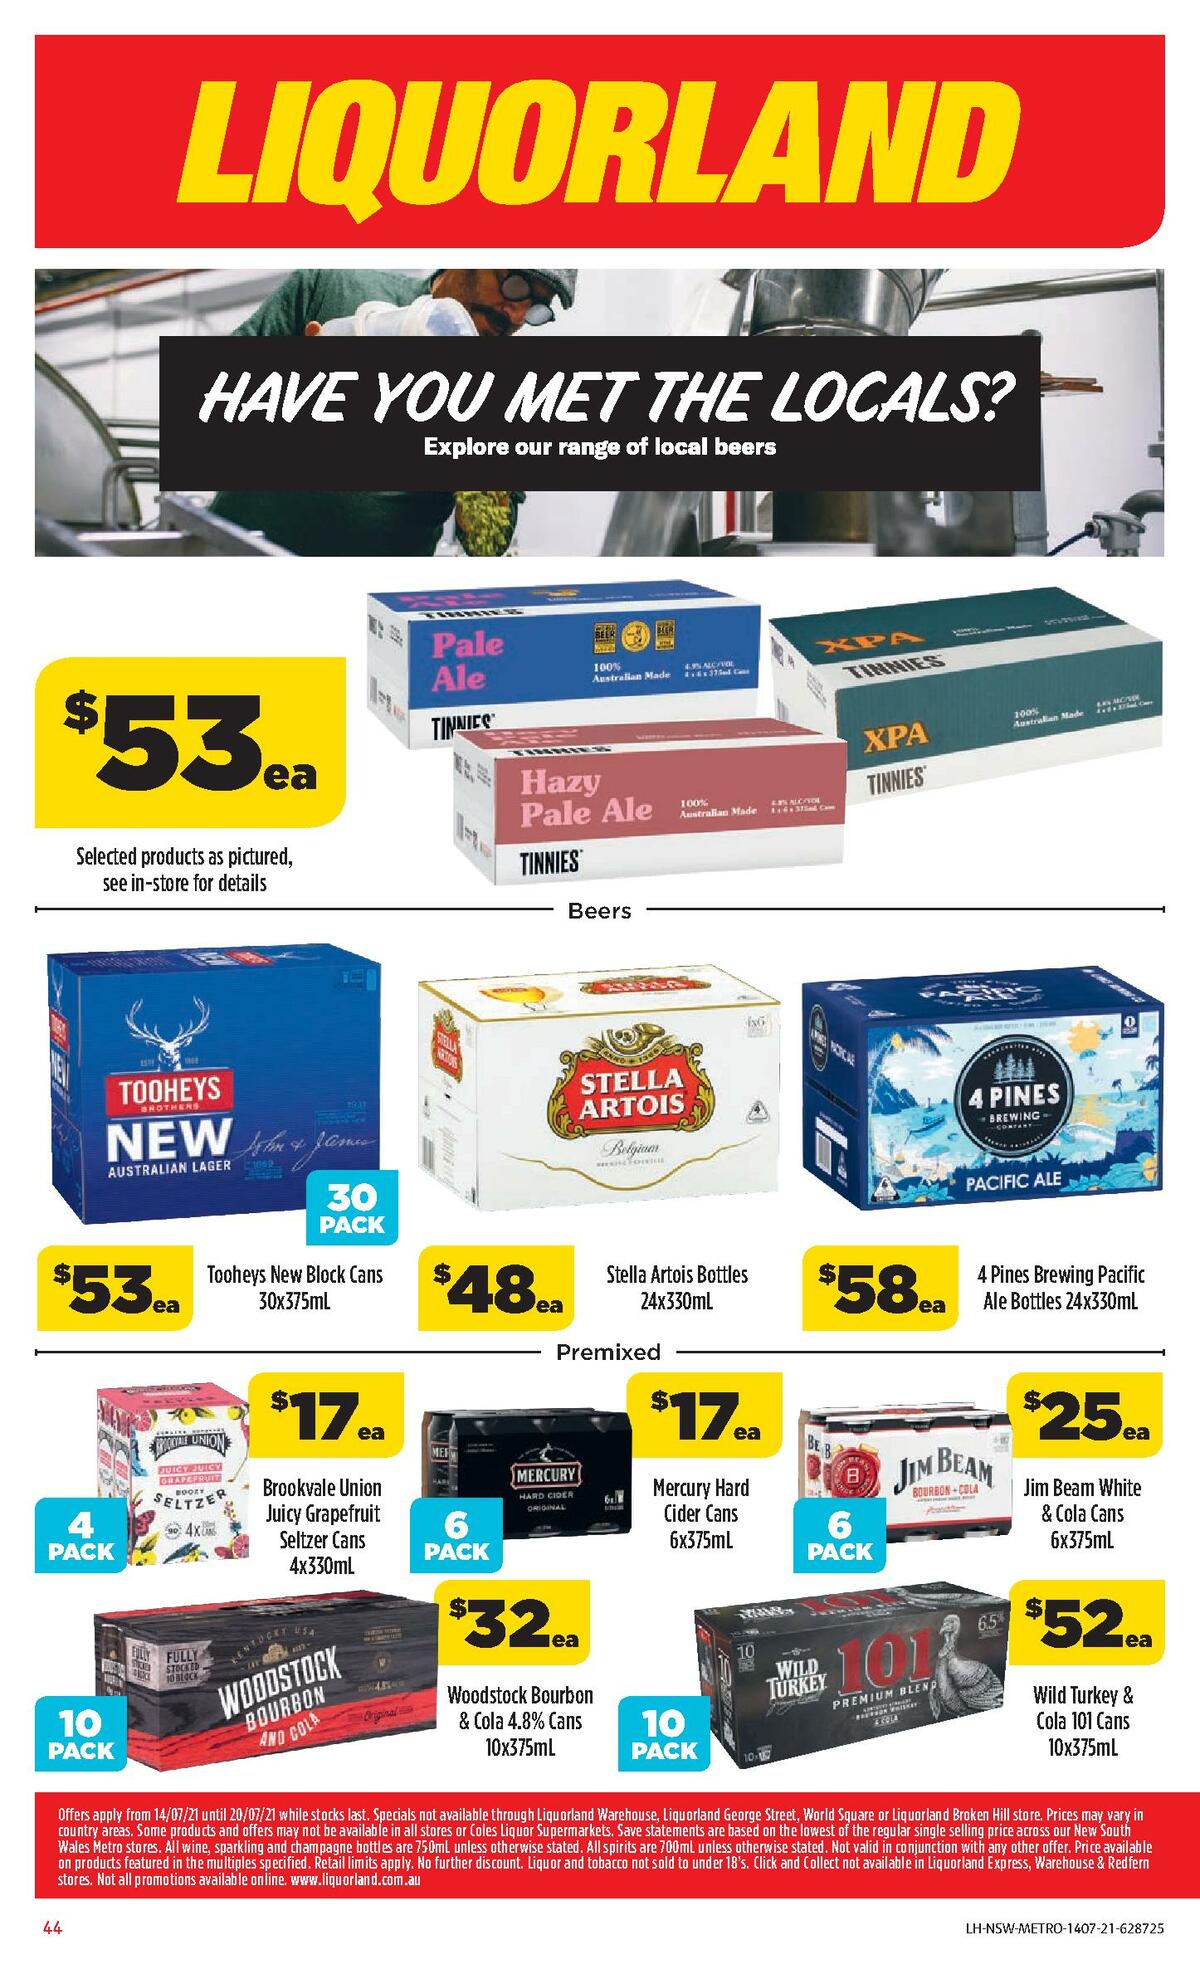 Coles Catalogues from 14 July